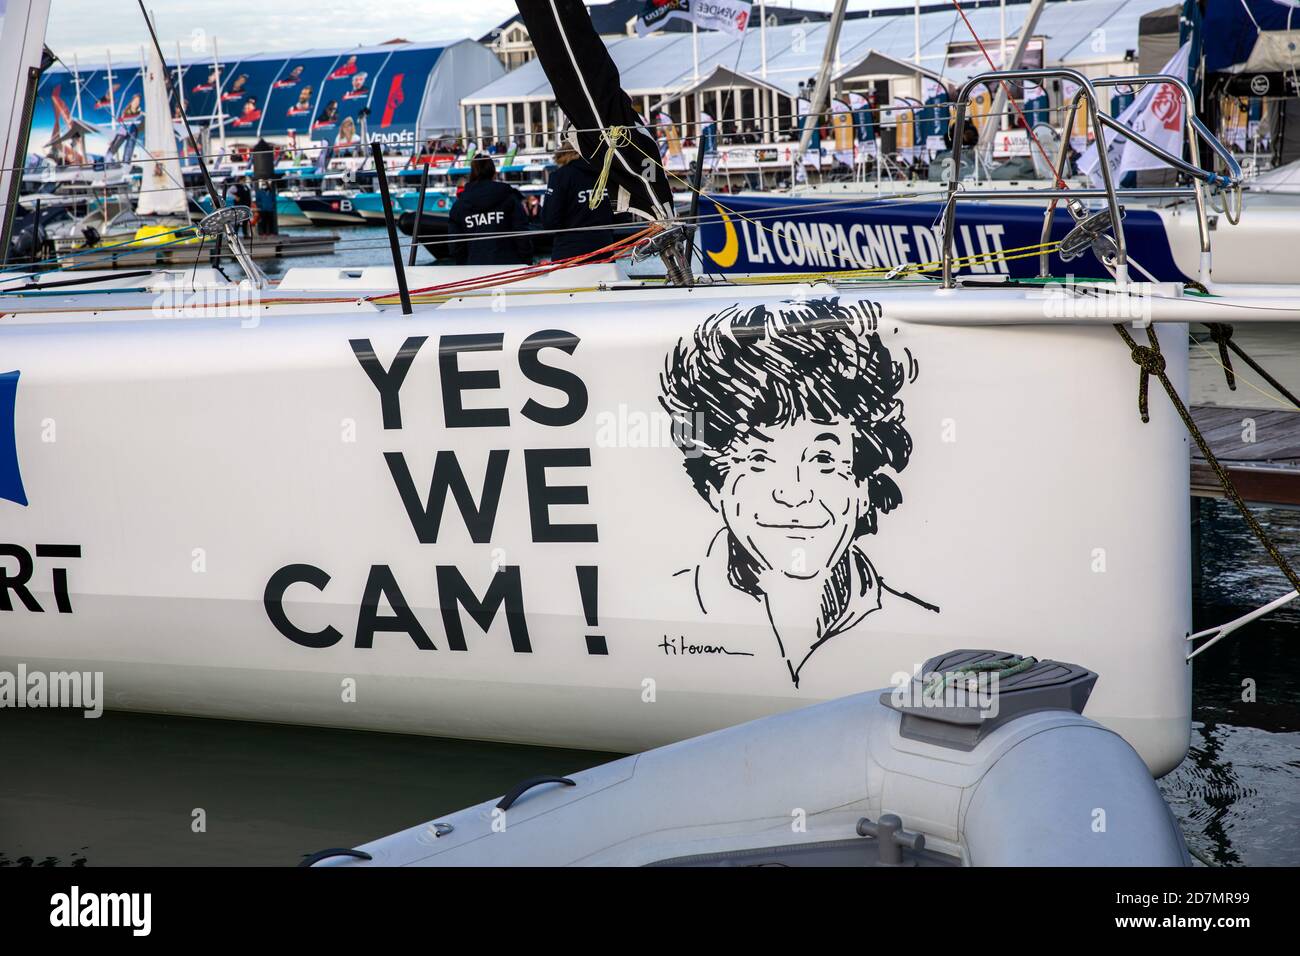 LES SABLES D'OLONNE, FRANCE - OCTOBER 19, 2020: Portrait of Jean Le Cam by Titouan Lamazou on the hull of the Yes We Cam boat for the Vendee Globe Stock Photo